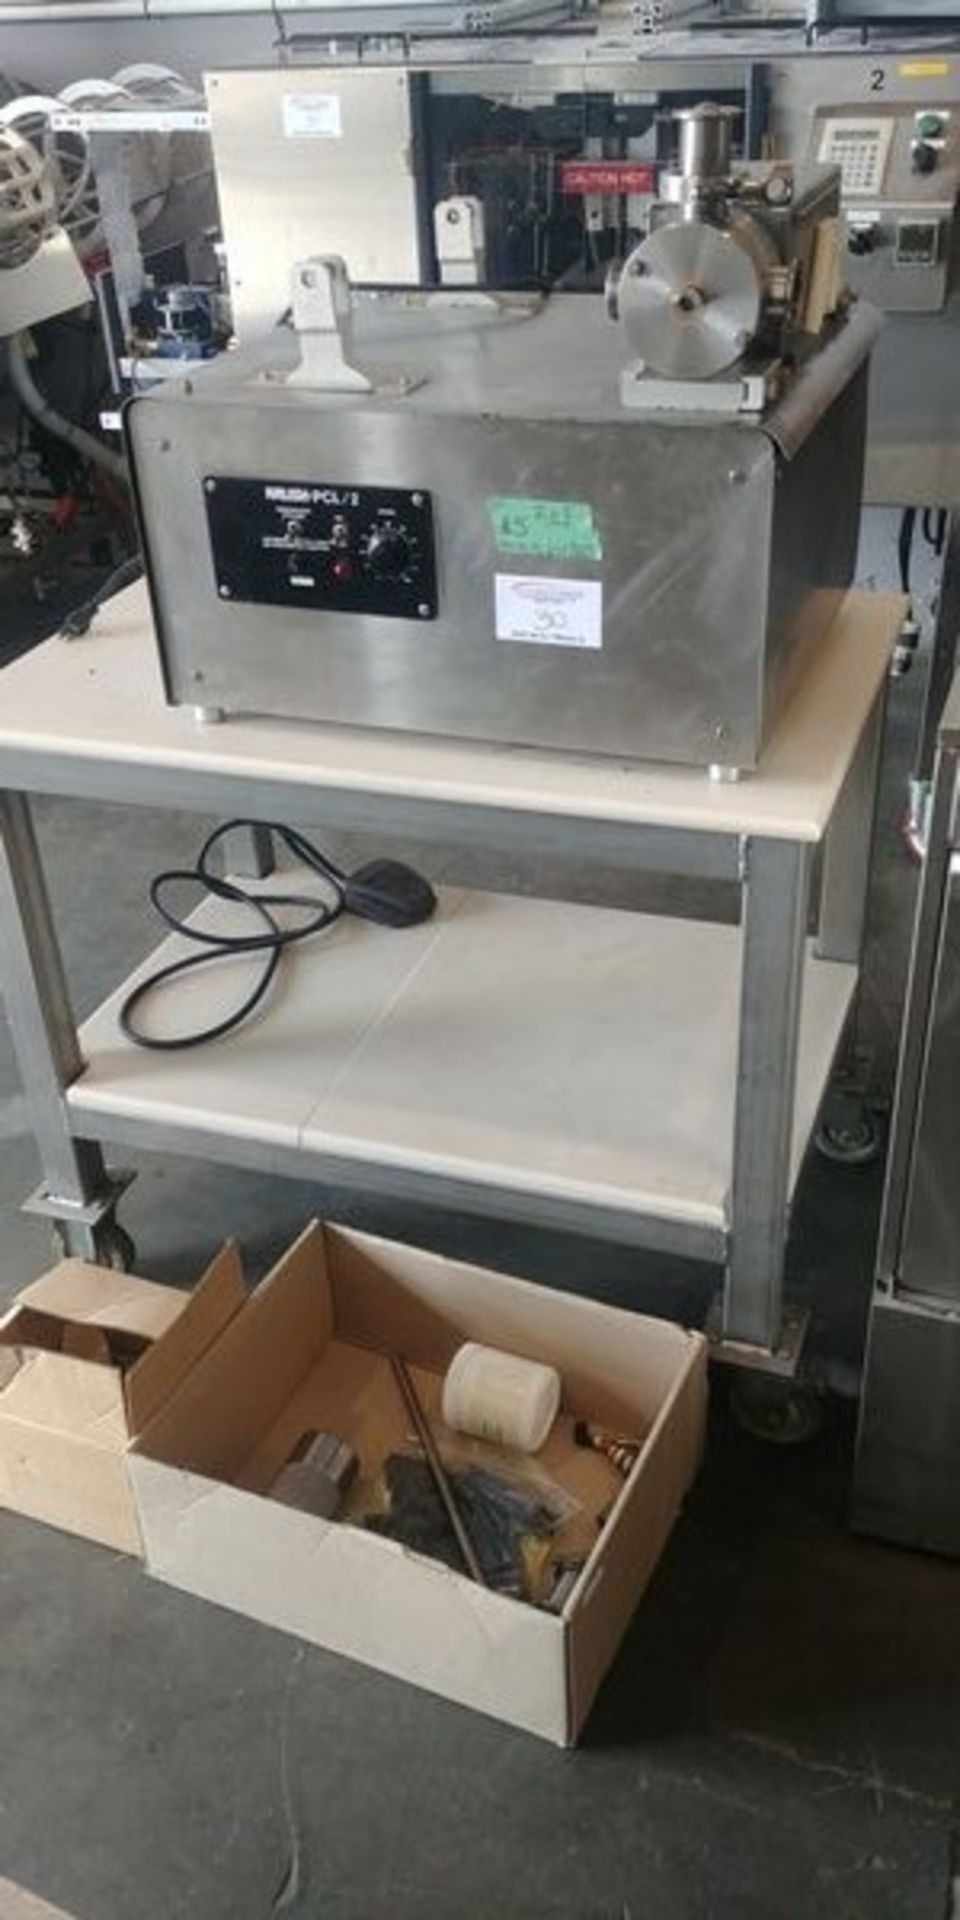 Kalish - Model PCL / 2 Twin Head Piston Filler on Cart with 2 Boxes of Additional Parts